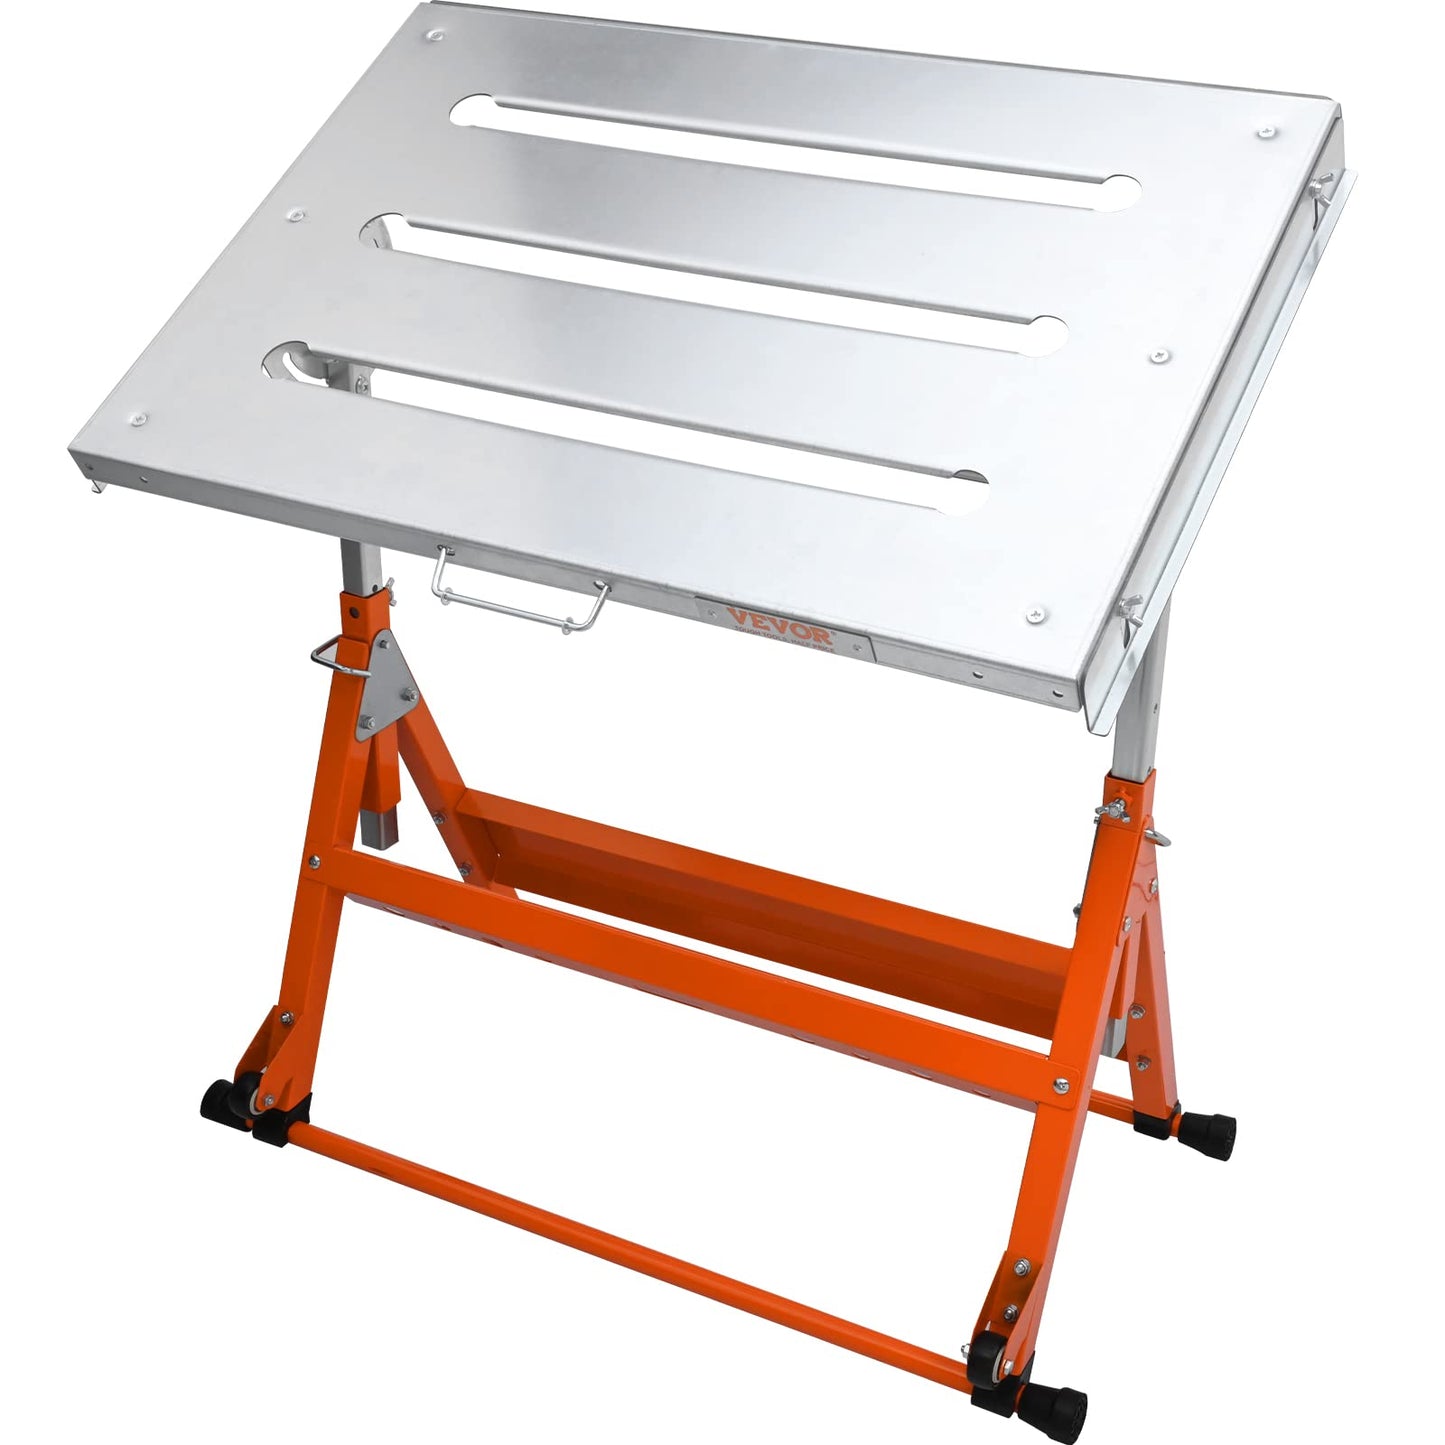 VEVOR Welding Table 30"x20", 400lbs Load Capacity Steel Welding Workbench Table on Wheels, Folding Work Bench with Three 1.1" Slot, 3 Tilt Angles,